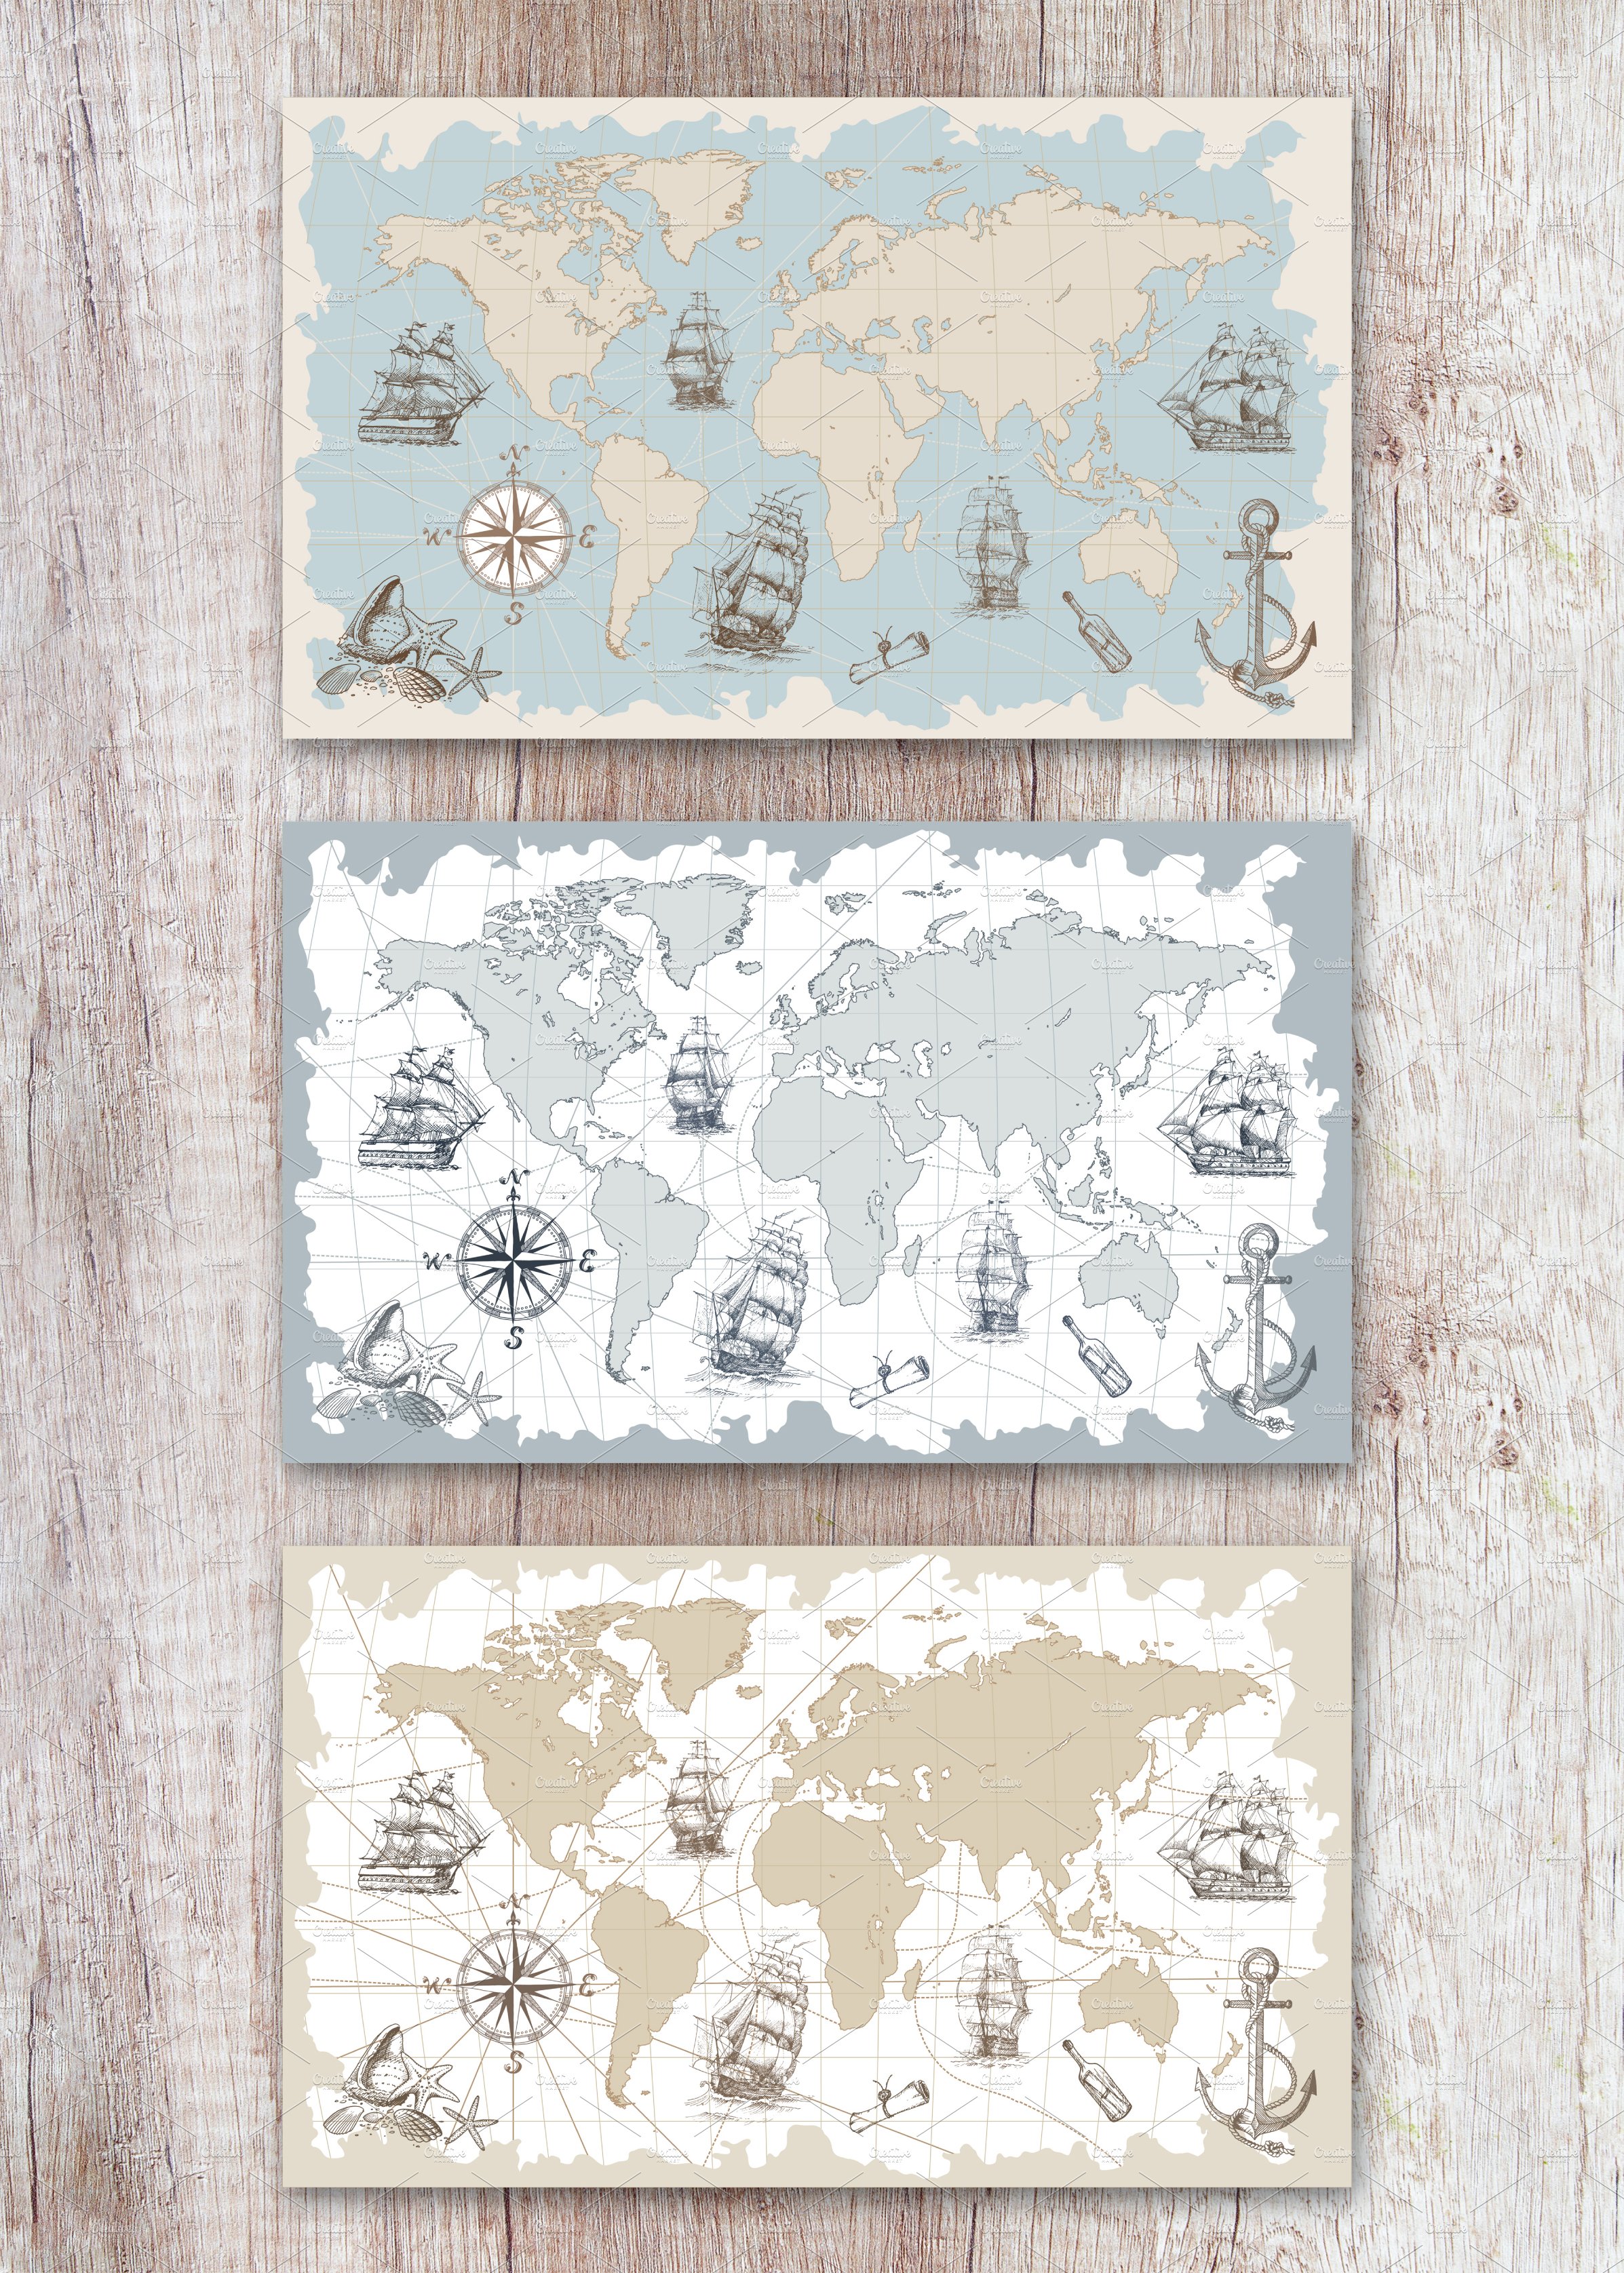 Some illustrations with world maps.